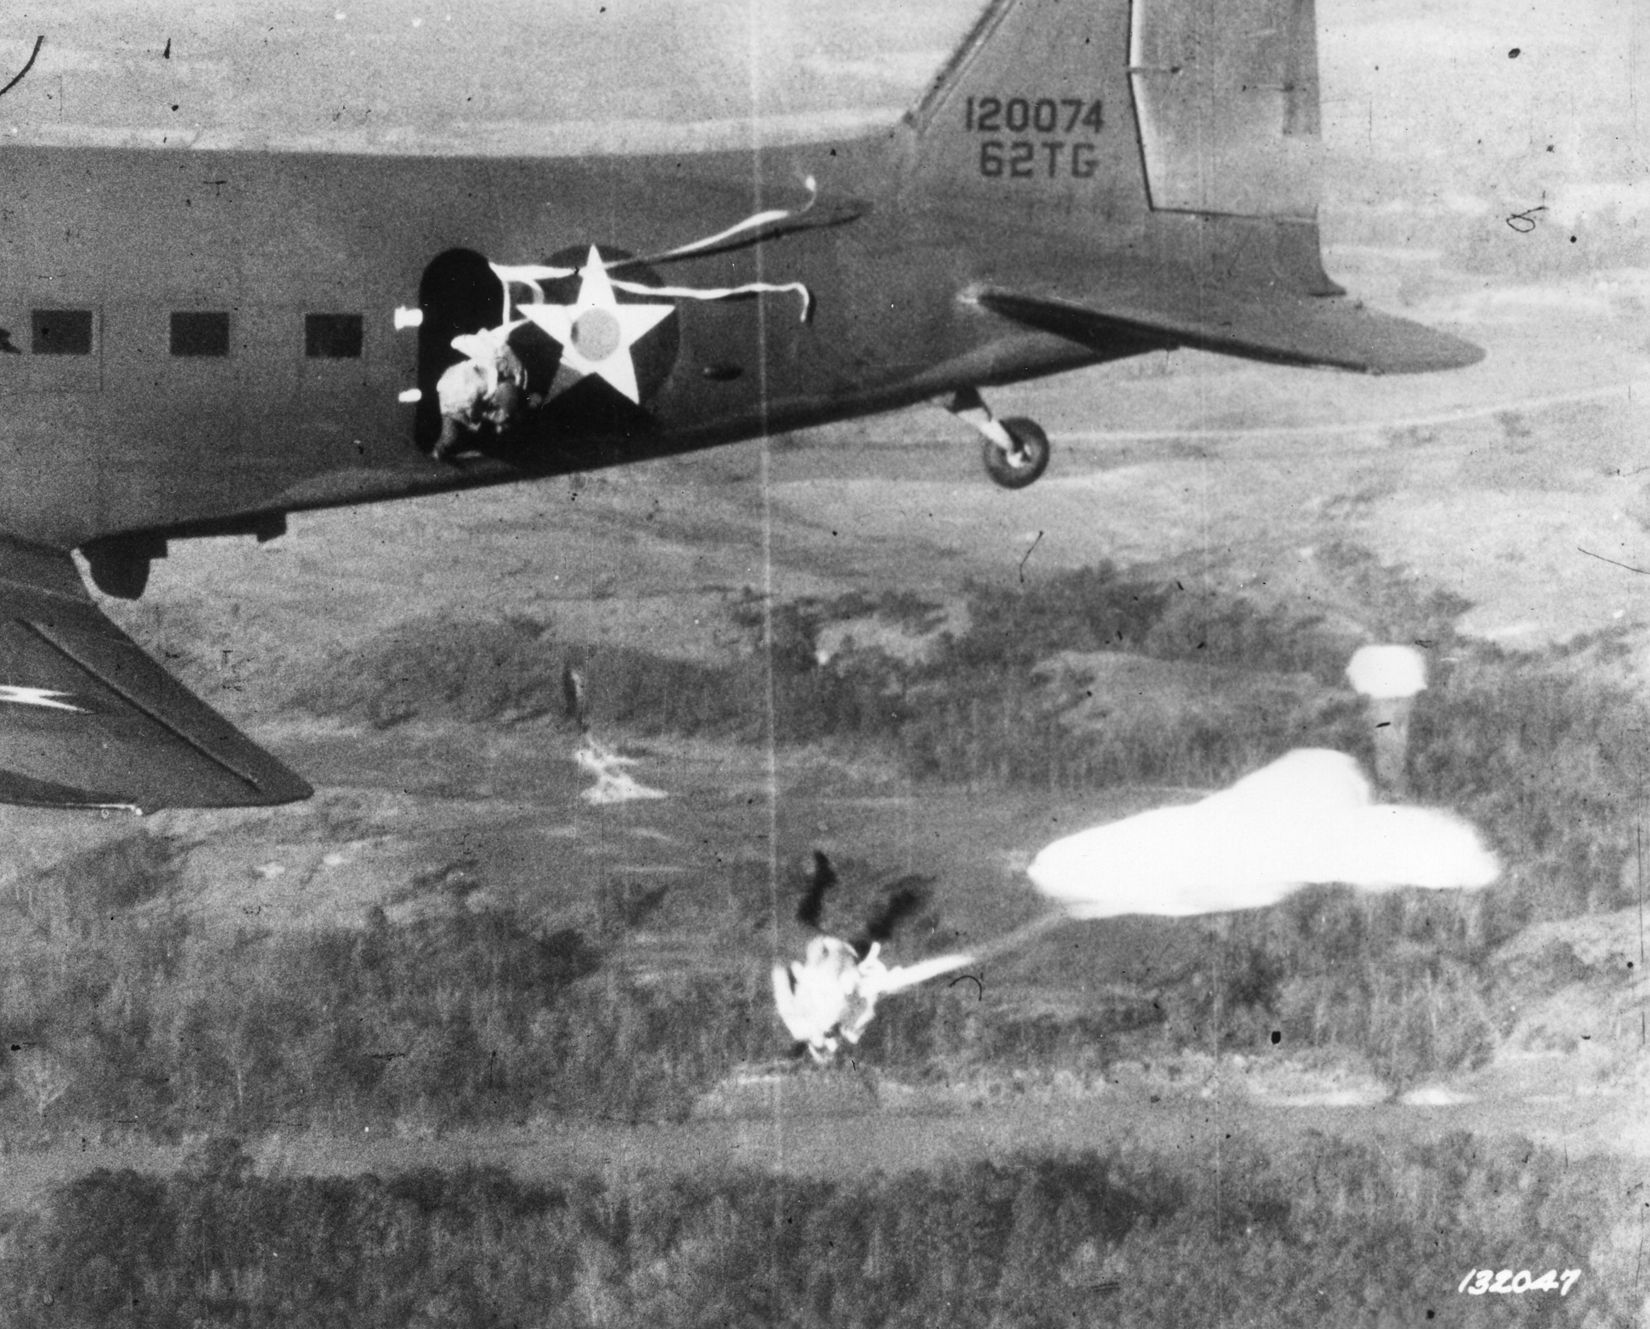 Paratroopers jump from a C-47 over Fort Benning, Georgia, where Mauser earned his wings. He would complete his stateside training at Fort Bragg, North Carolina.